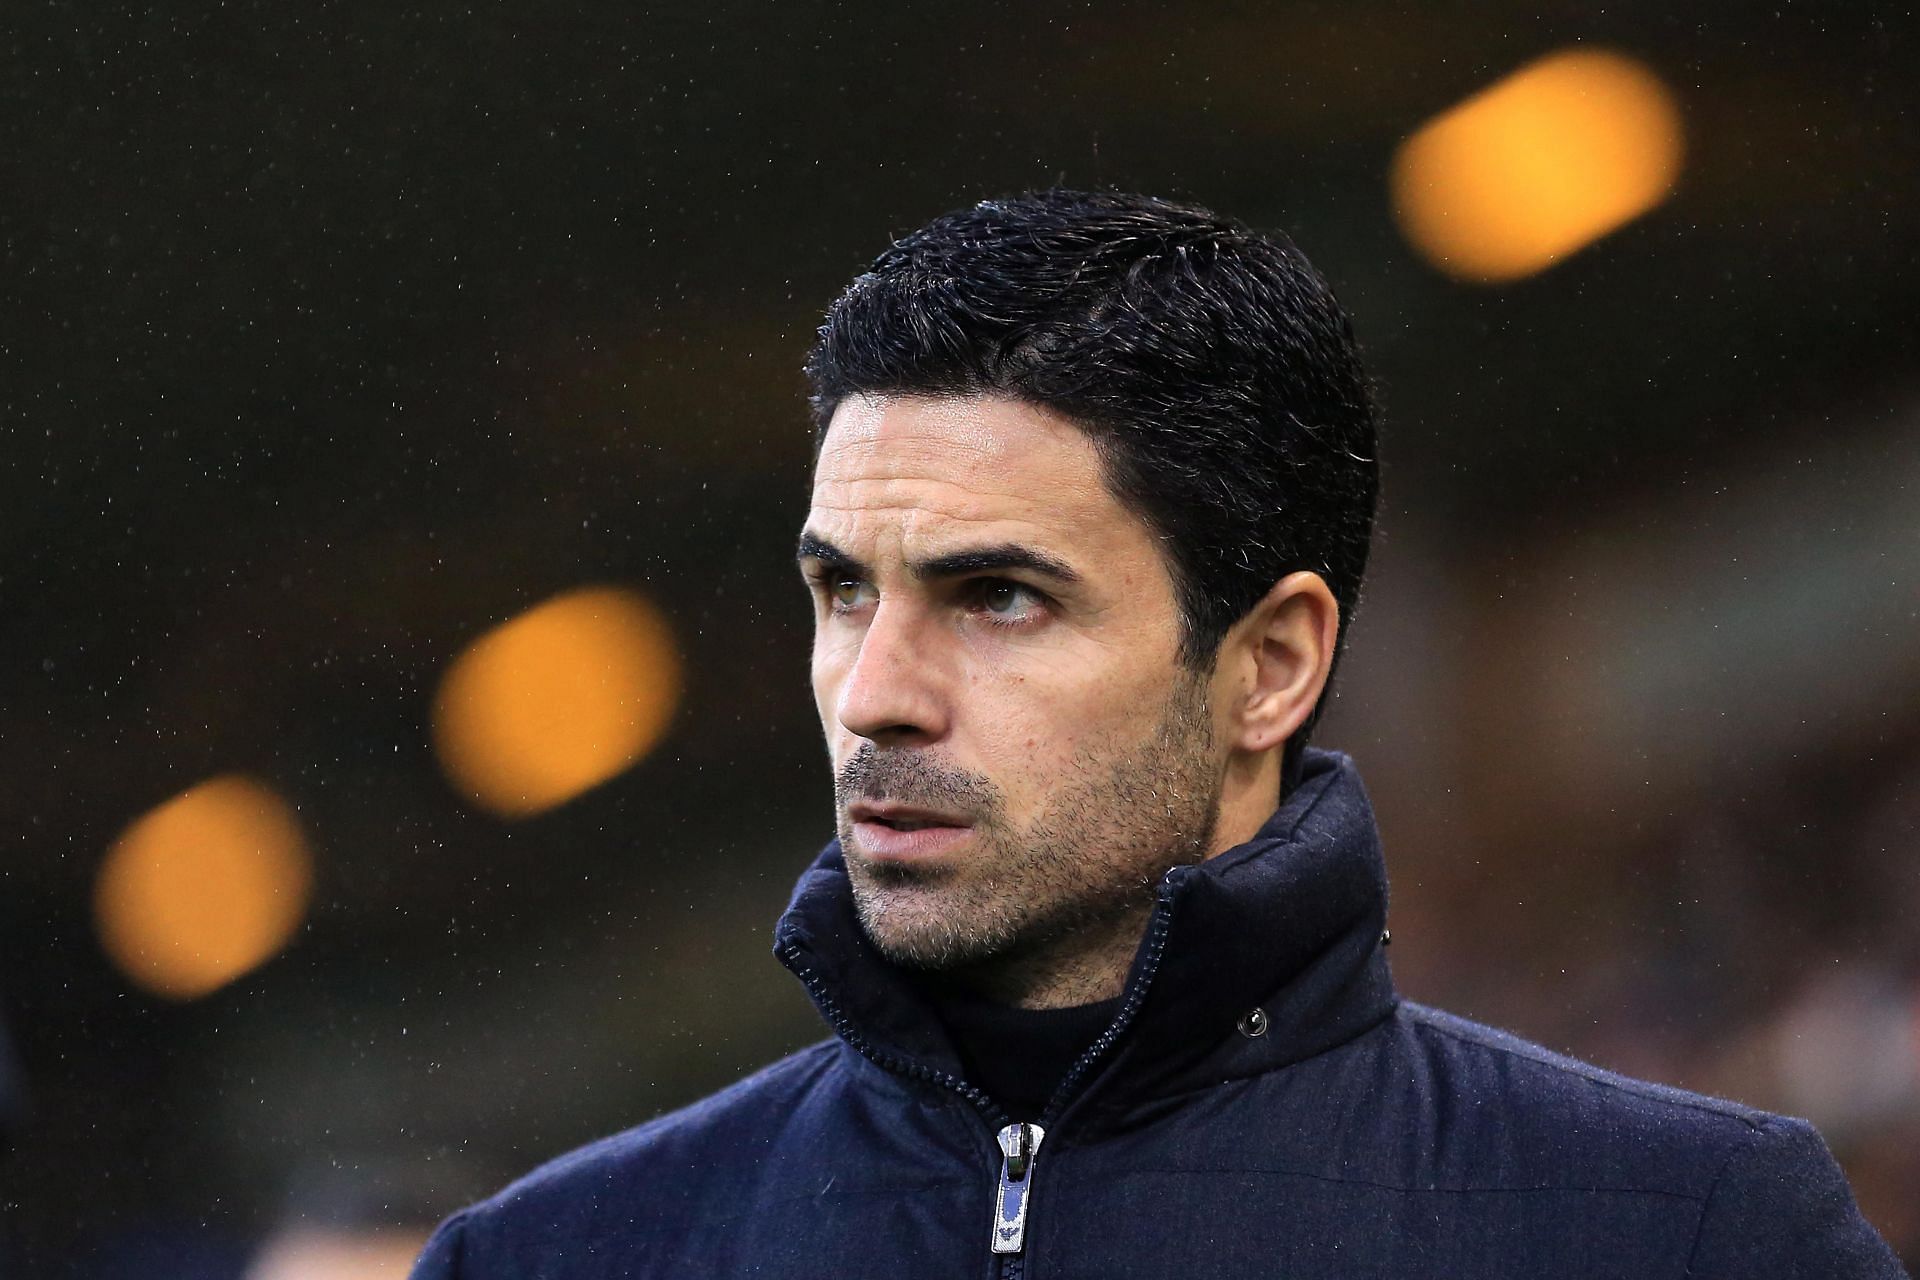 Arsenal manager Mikel Arteta is working to secure a top-four finish.